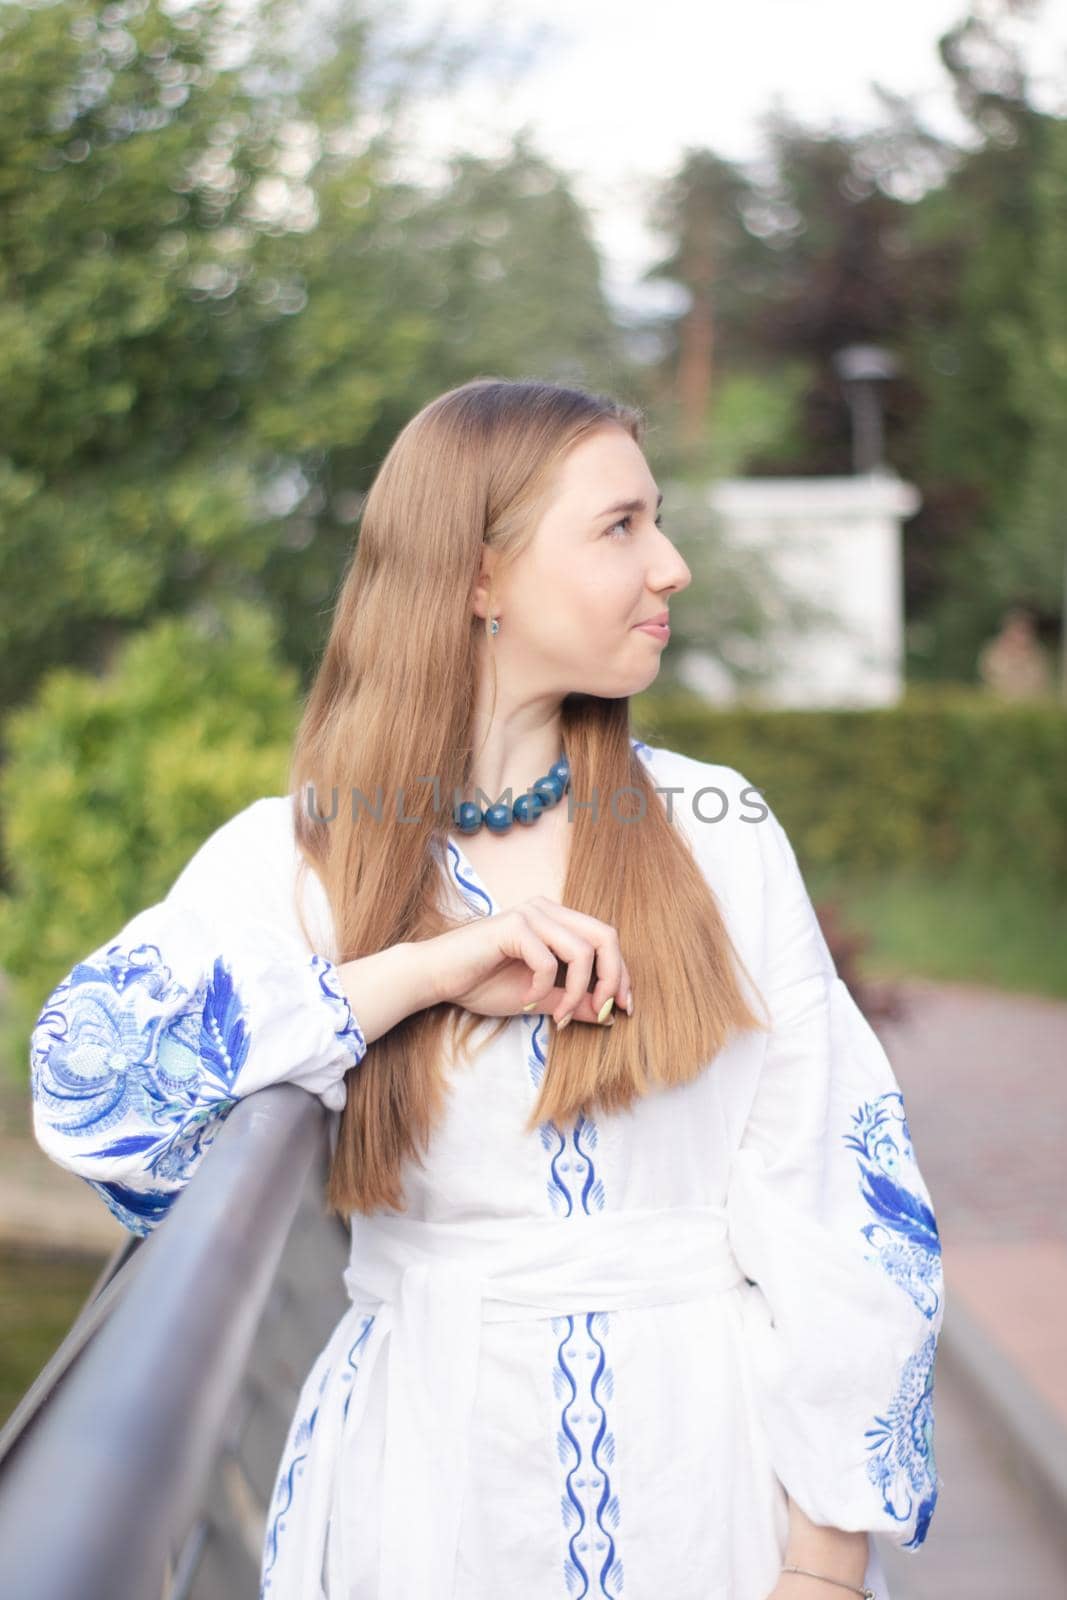 ukrainian blonde girl in national blue dress - embroidered shirt. young woman patriot. outdoors photo of charming female.